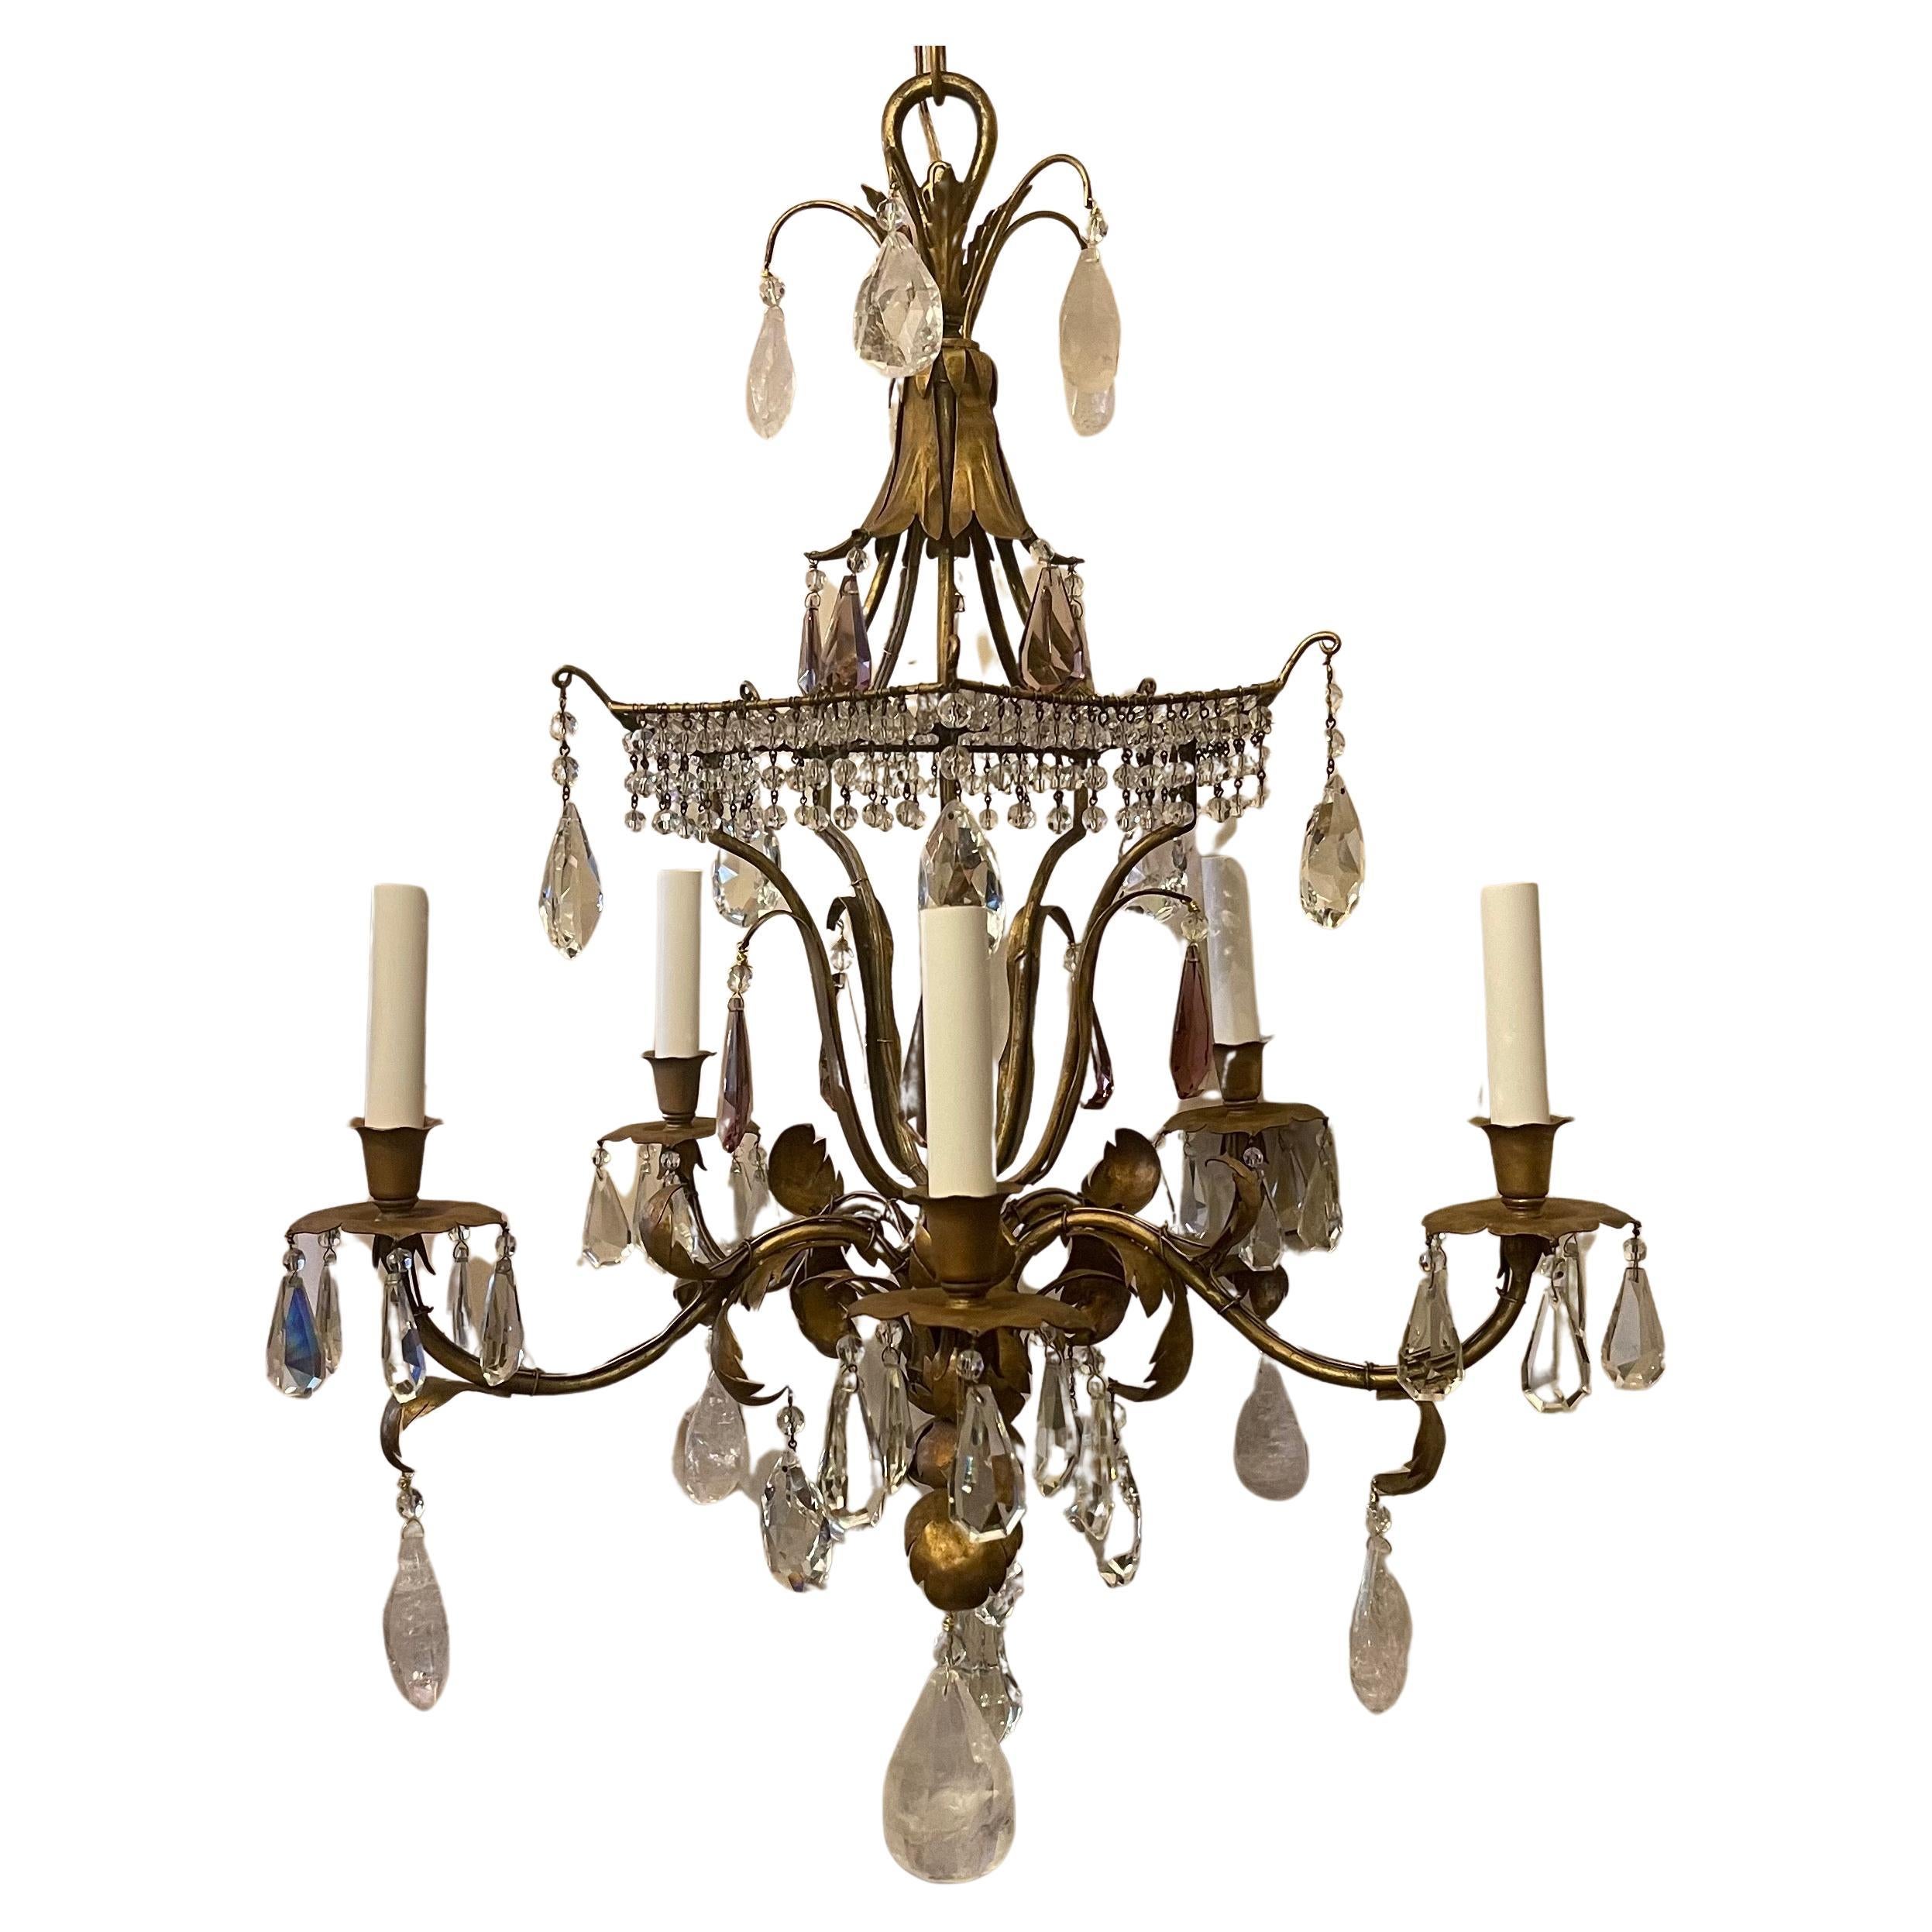 A Wonderful Maison Baguès Style Rock Crystal 7 Amethyst Drop And A Beautiful Beaded Pagoda Form Bird Cage Chandelier Having 5 Candelabra Lights In The Chinoiserie Motif. 
Accompanied By Chain Canopy And Mounting Hardware. 